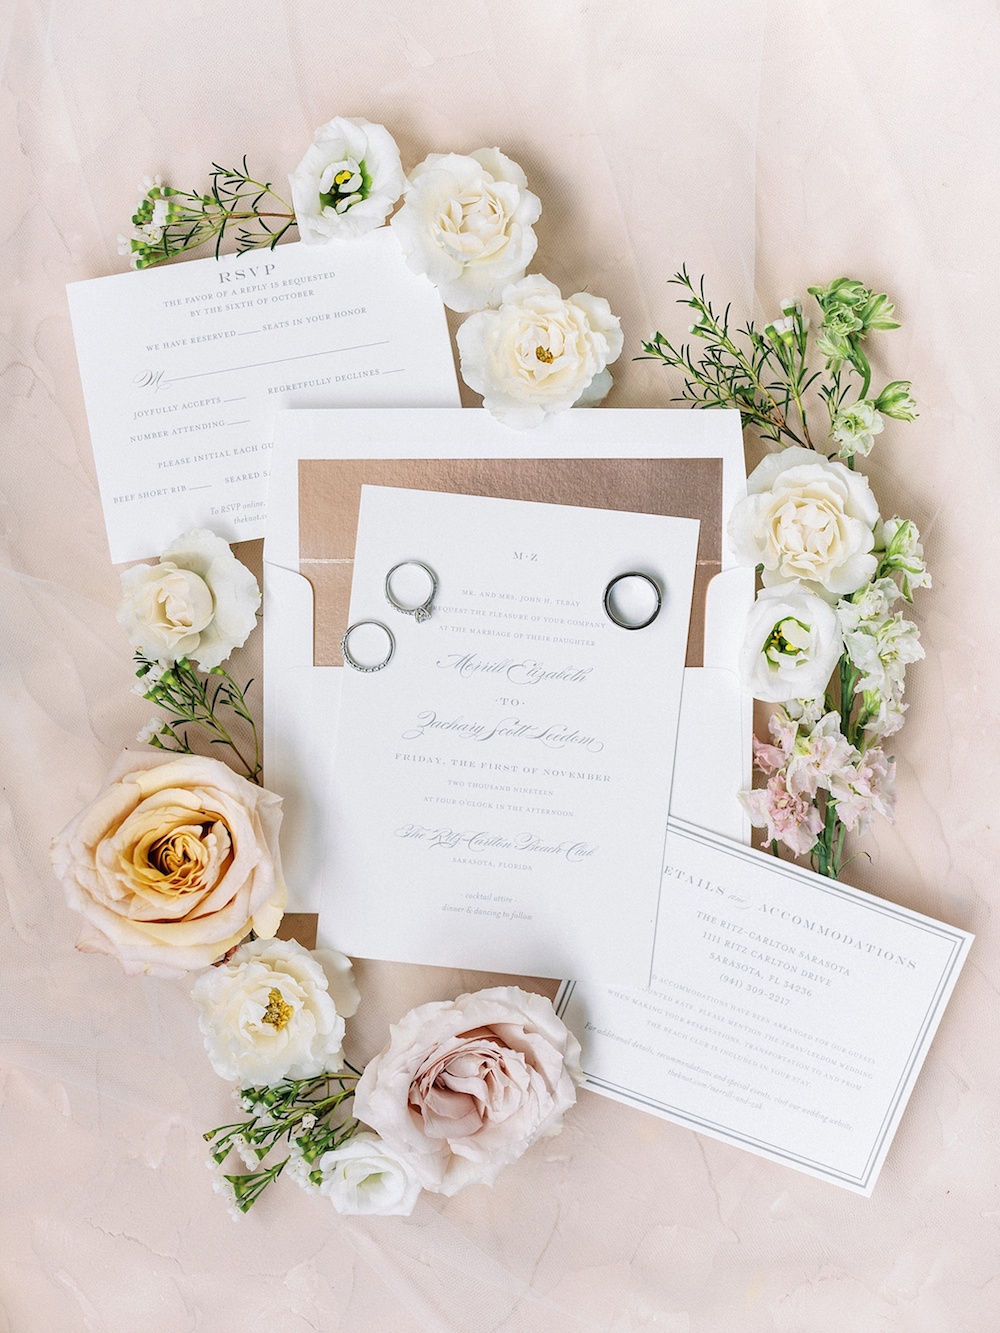 stationery surrounded by flowers and rings